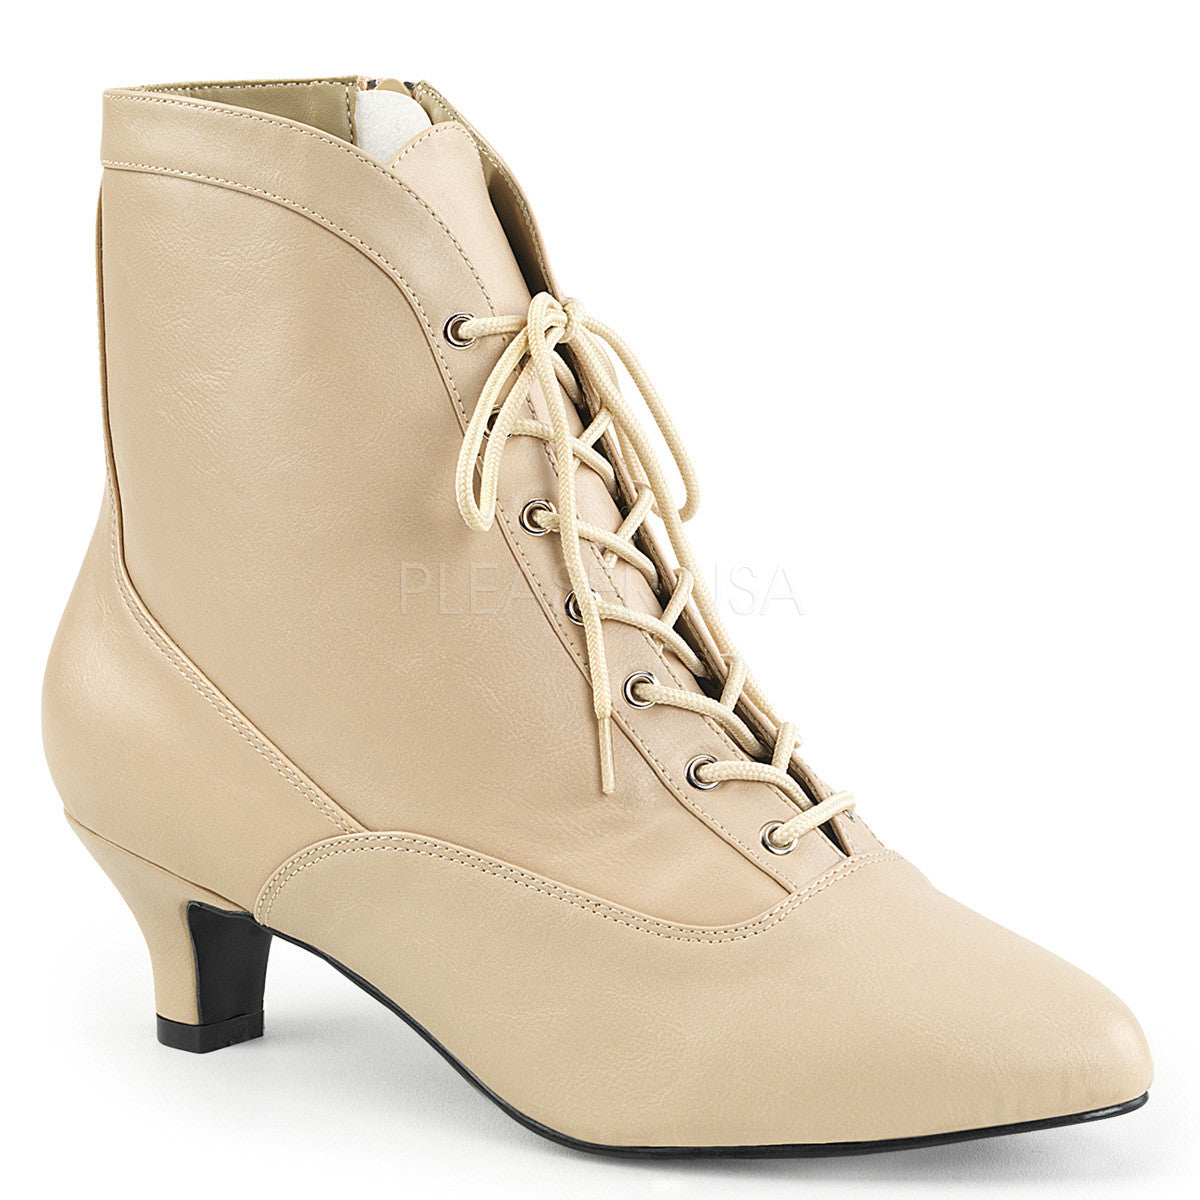 Pleaser Pink Label FAB-1005 Cream Faux Leather Ankle Boots - Shoecup.com